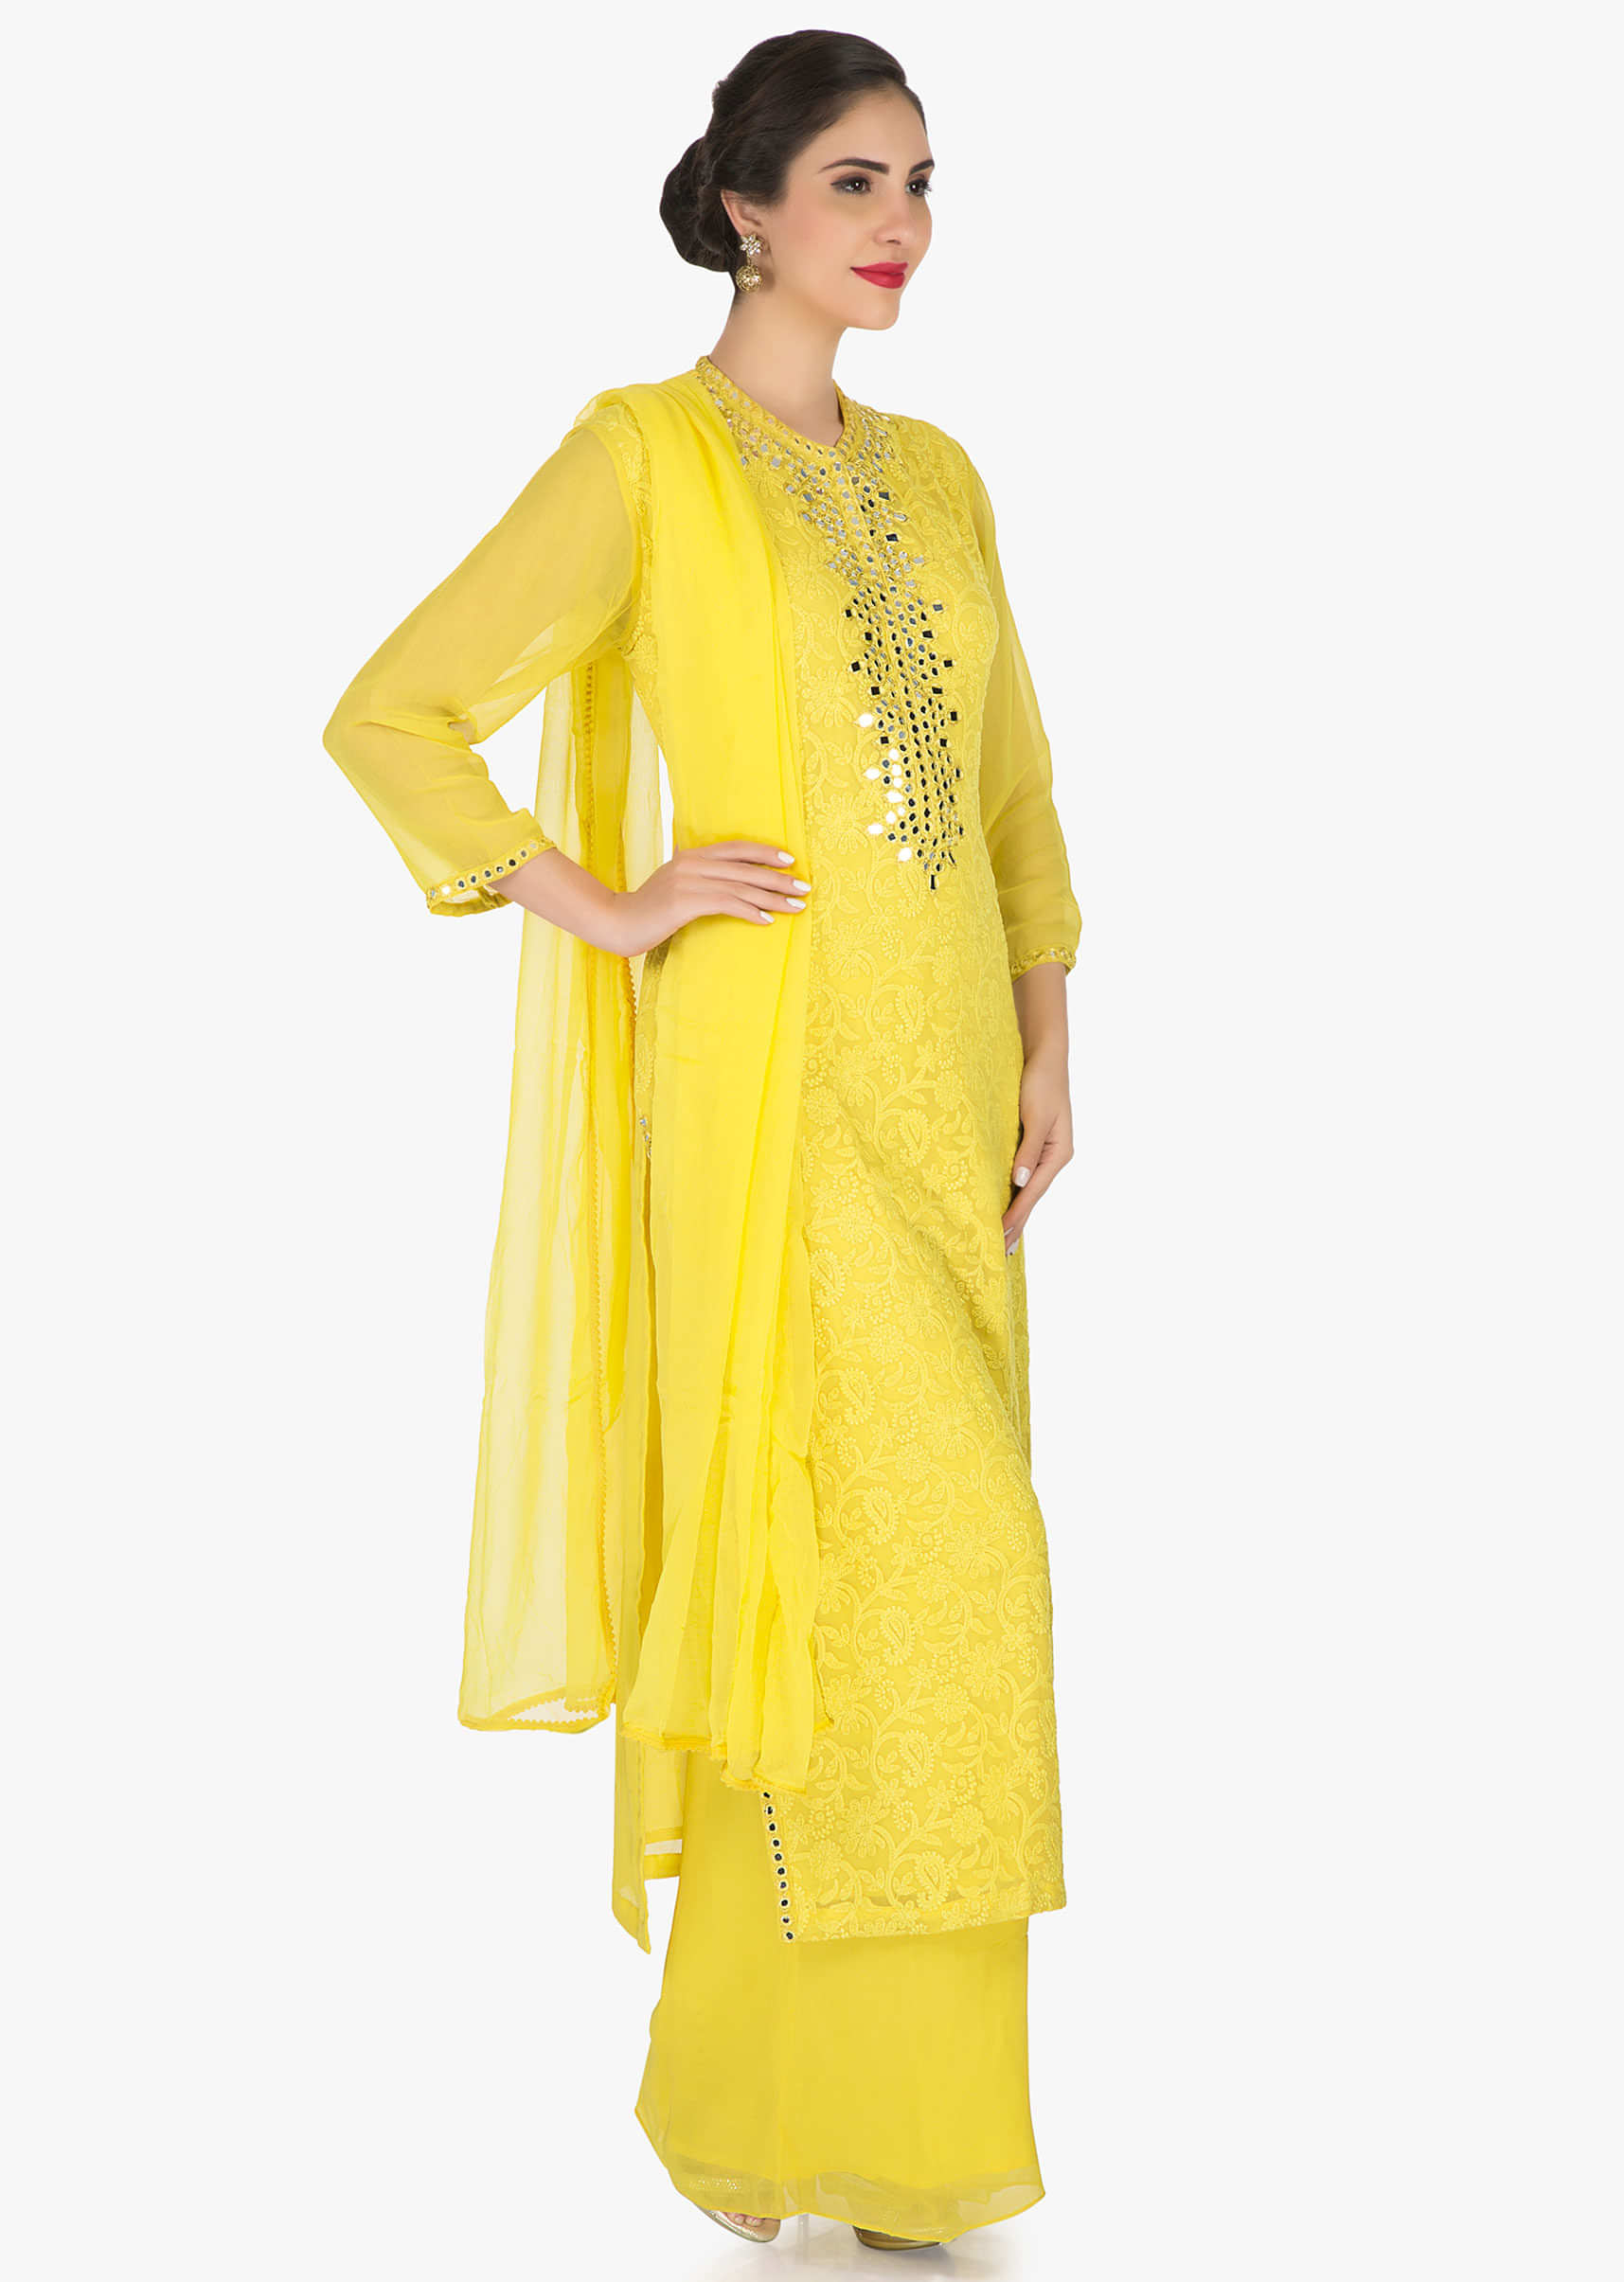 Yellow palazzo suit in georgette elevated in thread and mirror work only on Kalki